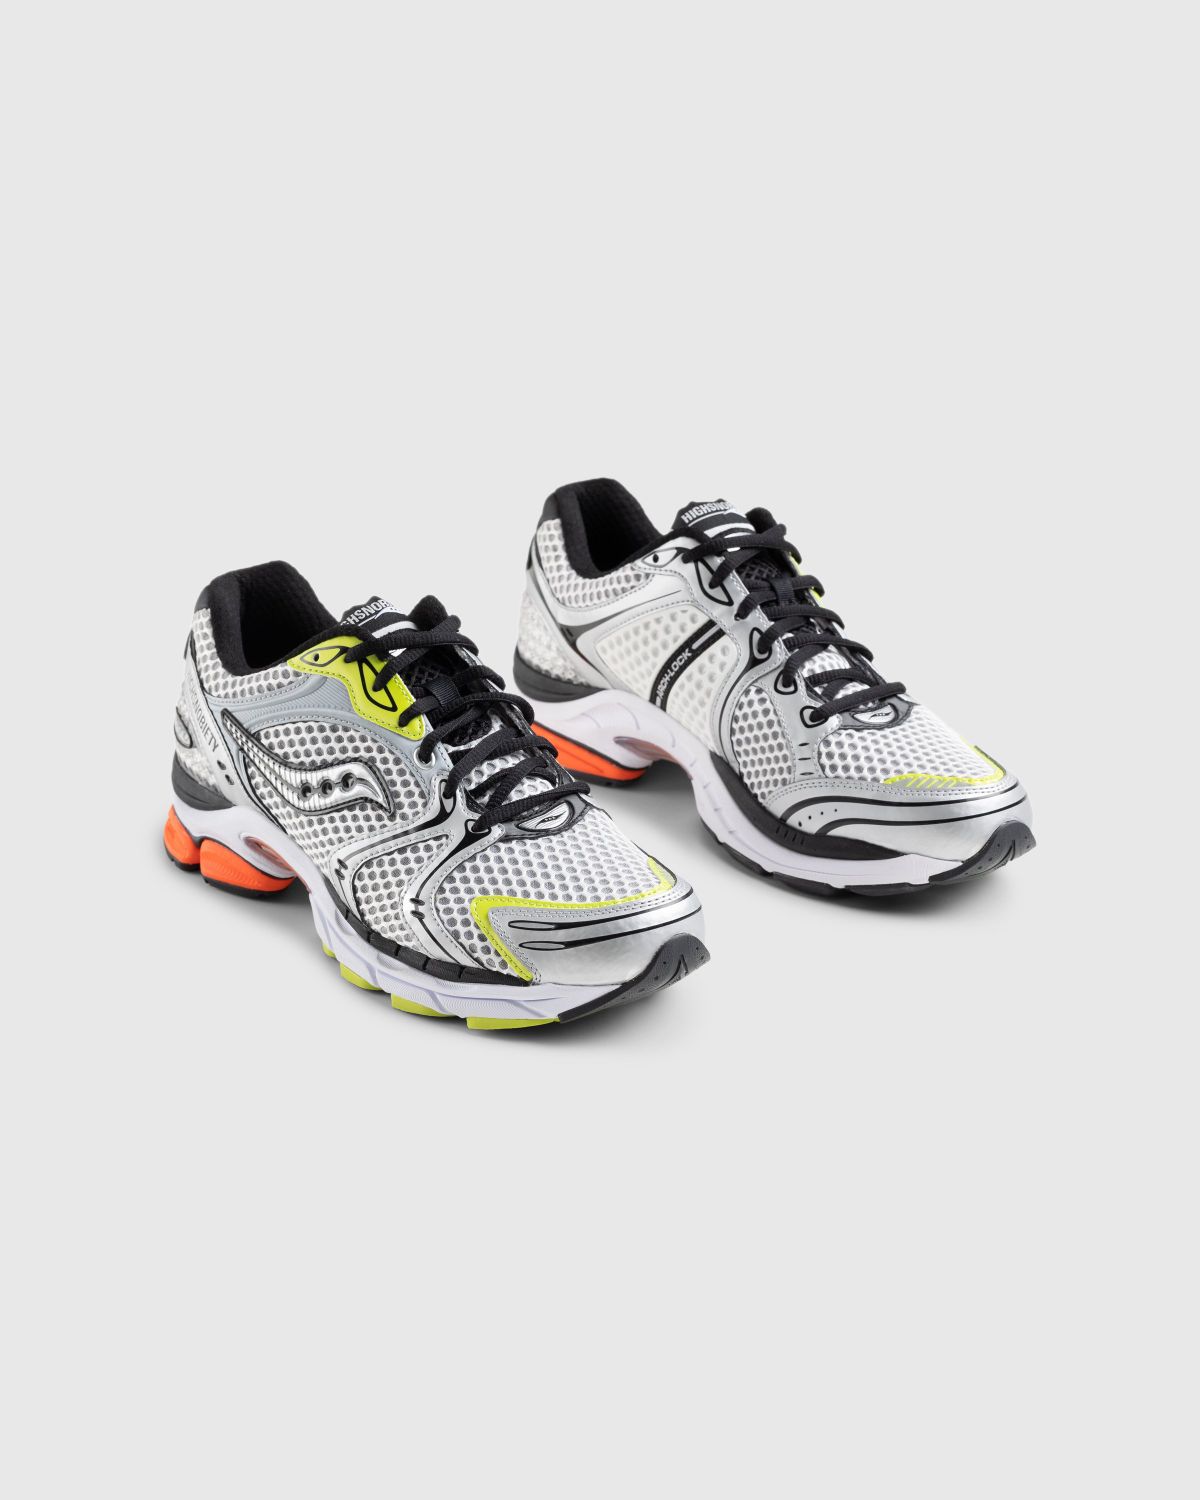 Saucony x Highsnobiety – Pro Grid Triumph 4 Silver/Multi - Sneakers - Silver - Image 3